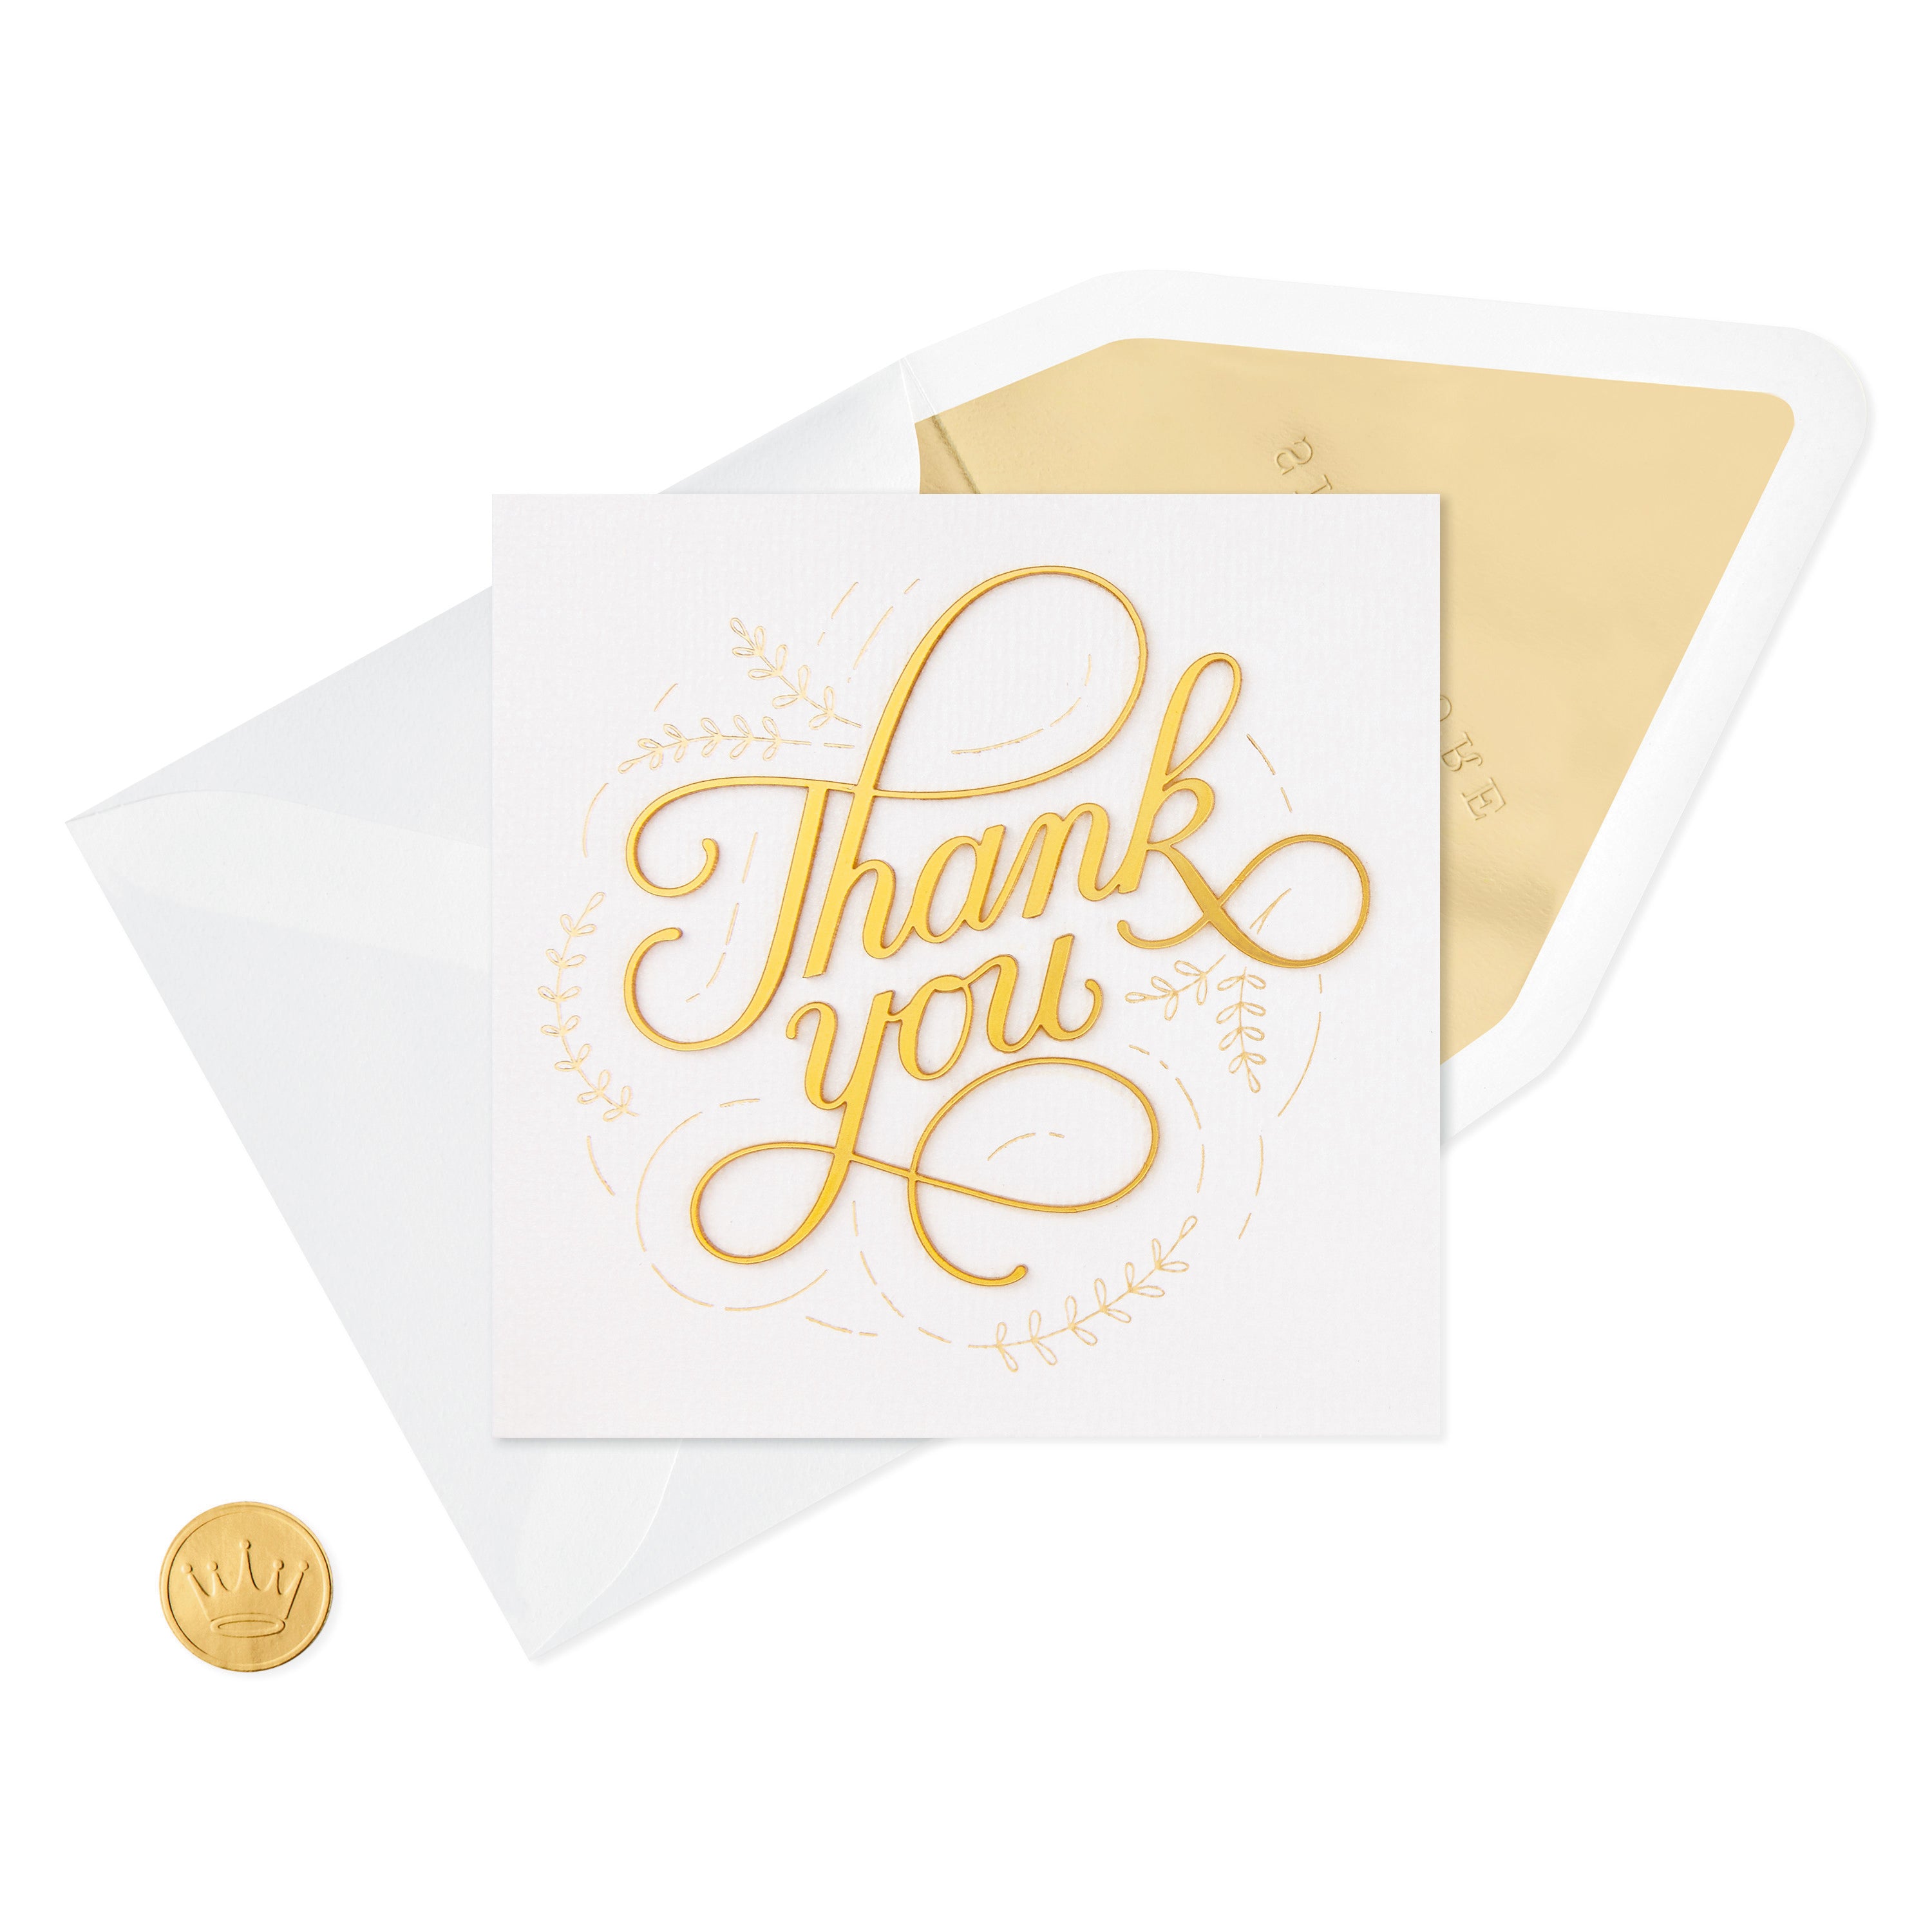  Signature Thank You Card, Thank You So Much (Nurses Day Card, Teacher Appreciation, Healthcare Worker Gift)